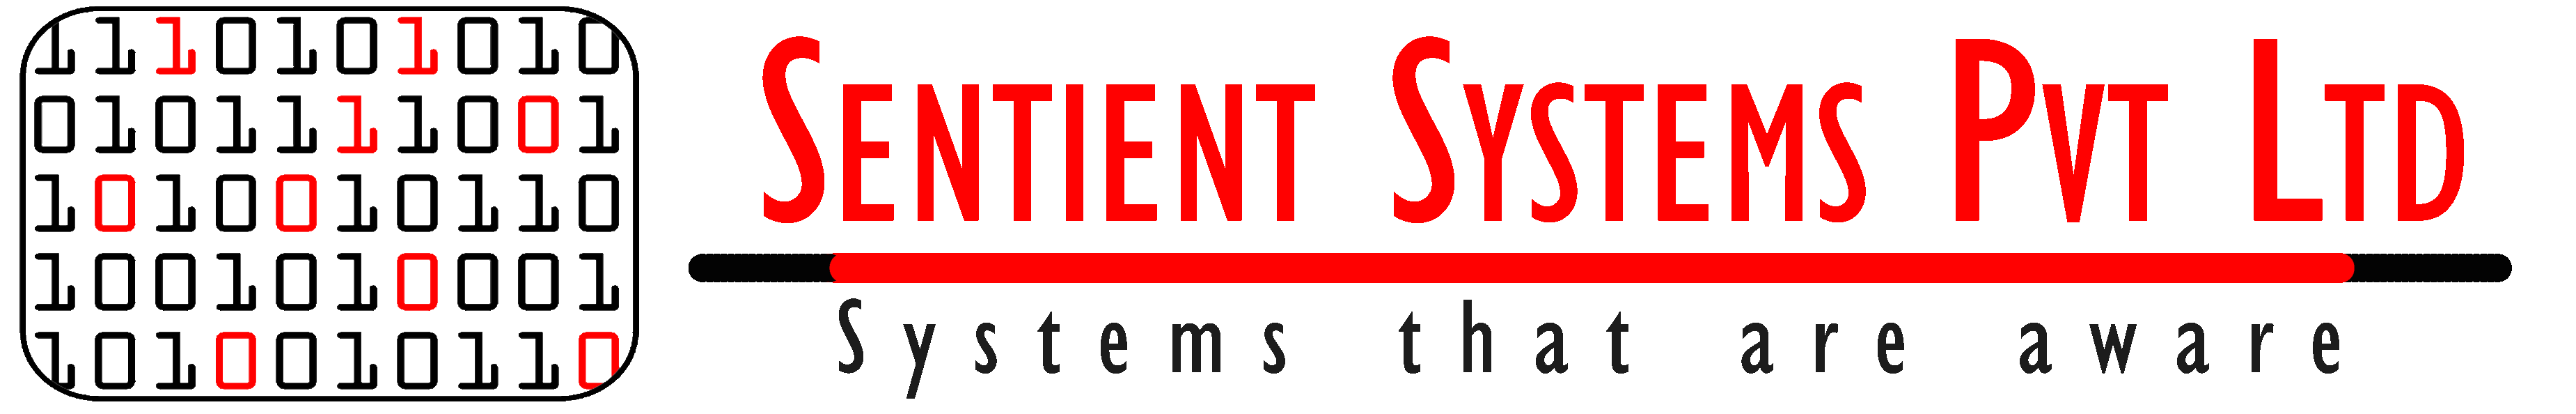 Jobs Openings in Sentient Systems